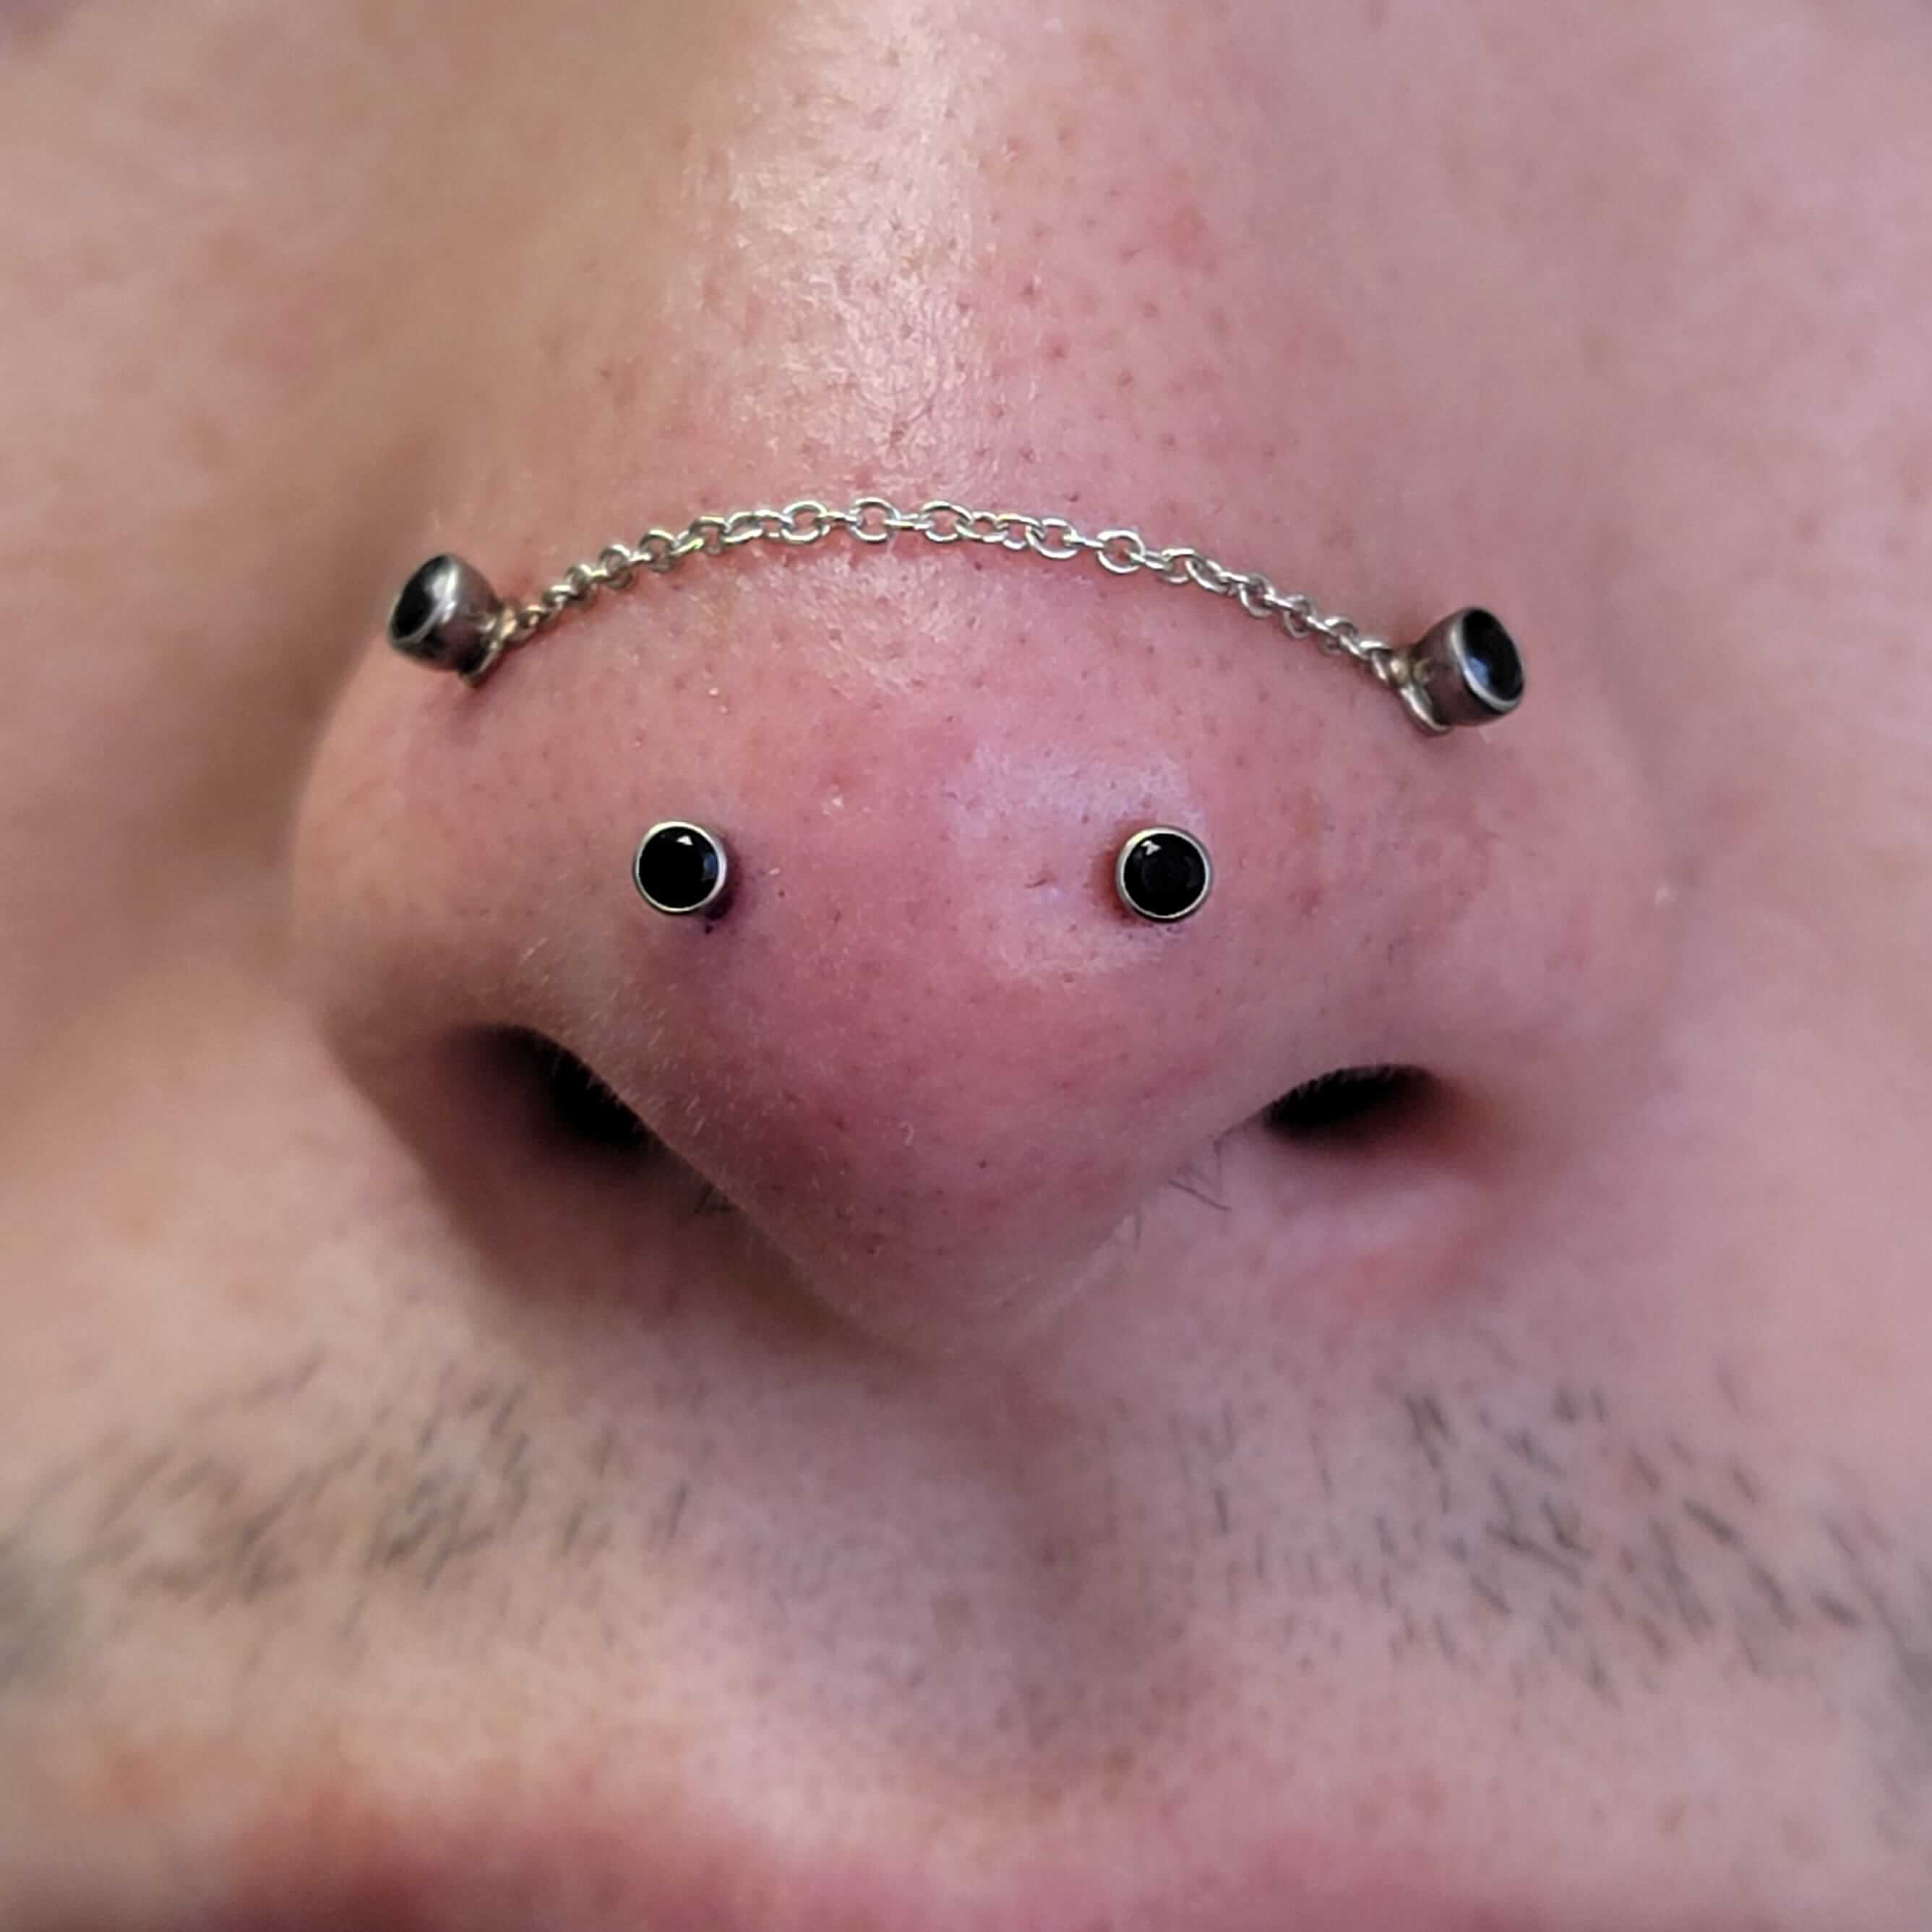 Mantis piercings and double nostril piercings adorned with a 14k white gold chain